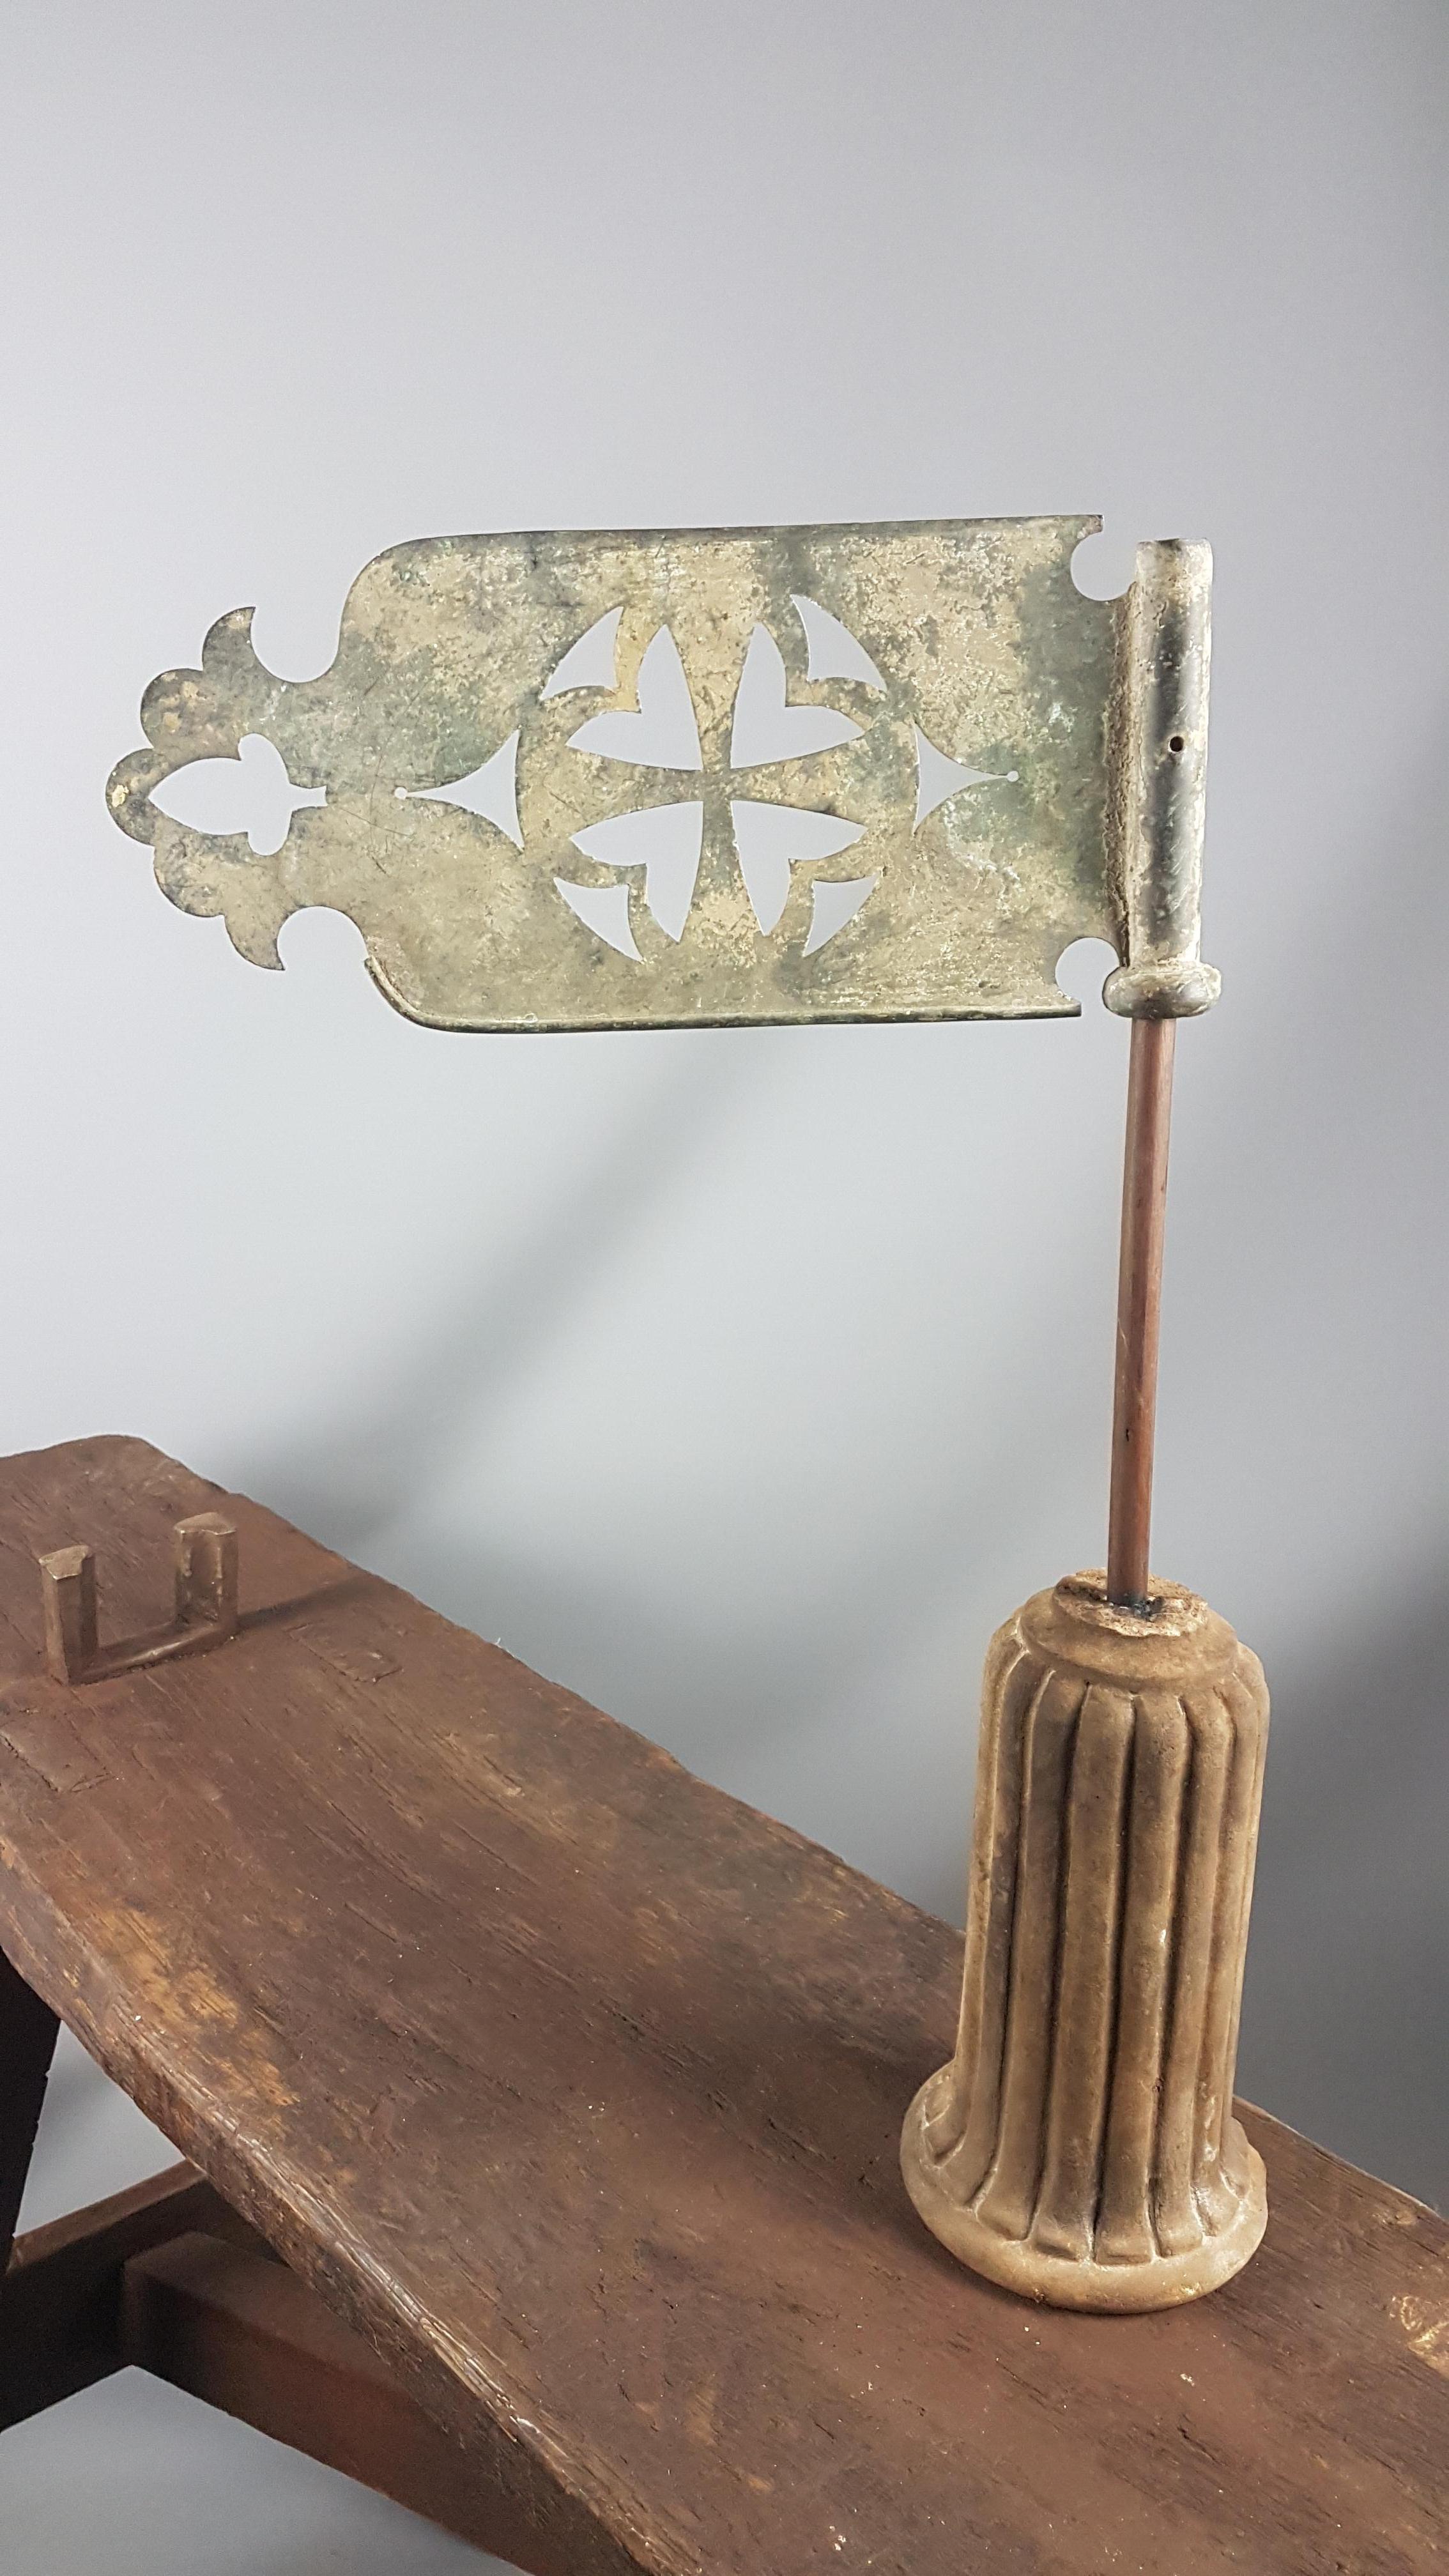 A decorative early Victorian copper banner flag weathervane often seen on the tops of Church of England churches. It has a very nice verdigris and retains elements of the original gilt finish. The form has a cross in the centre and at the tip there